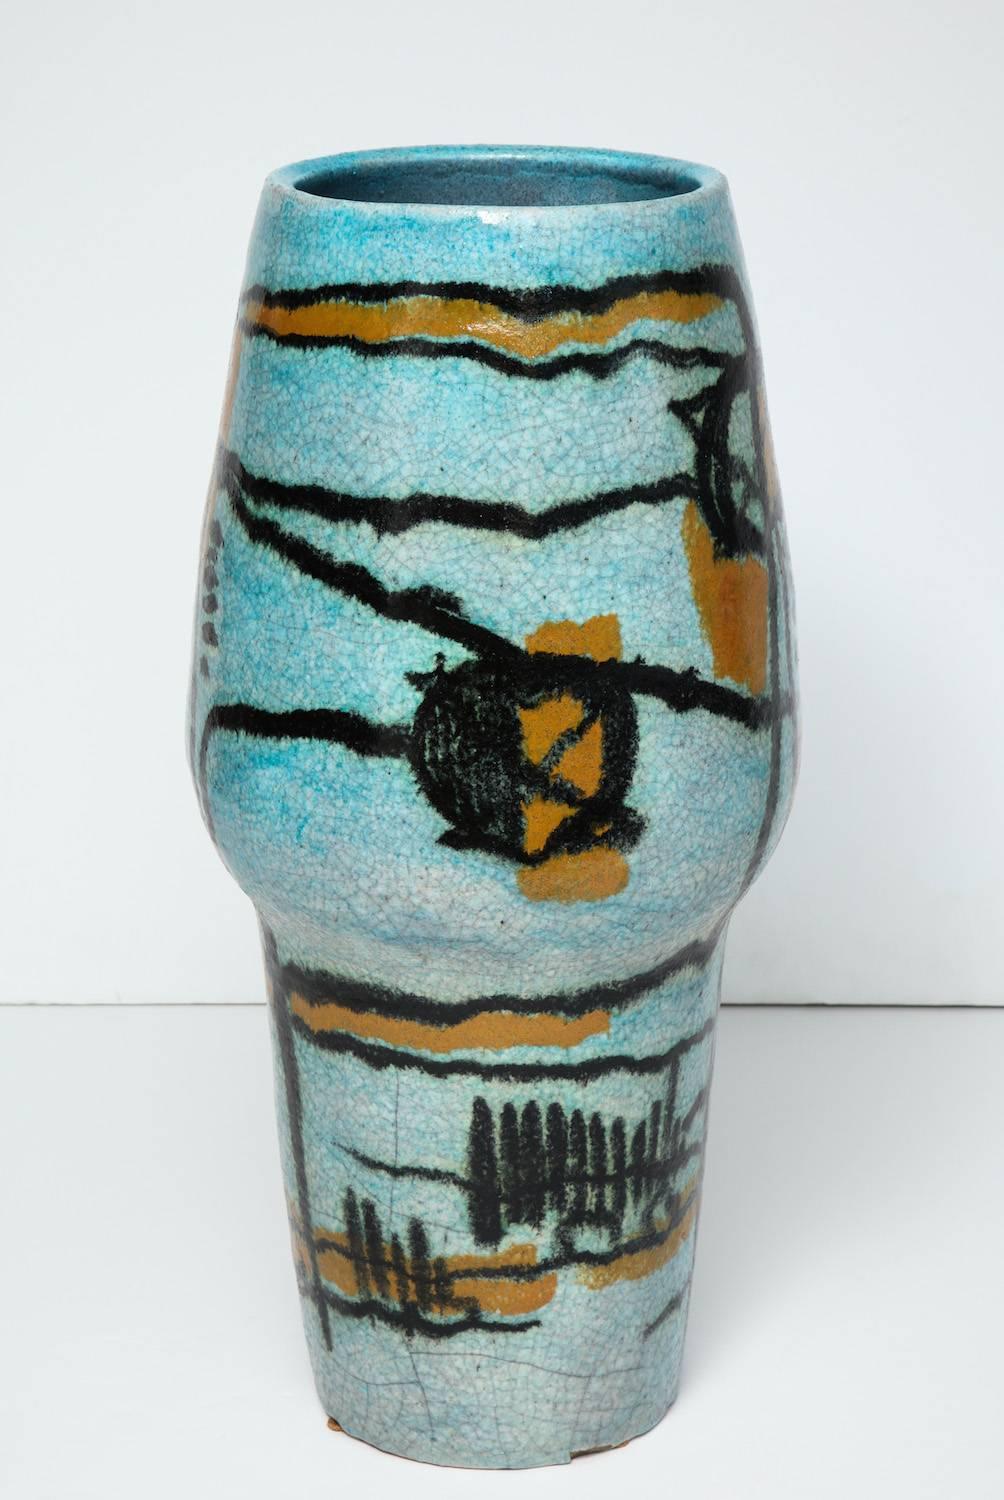 Large-scale, earthenware vase made on a wheel. Exterior has vivid blue glaze with graphic Primitive decoration in black and yellow. Artist signed on underside.